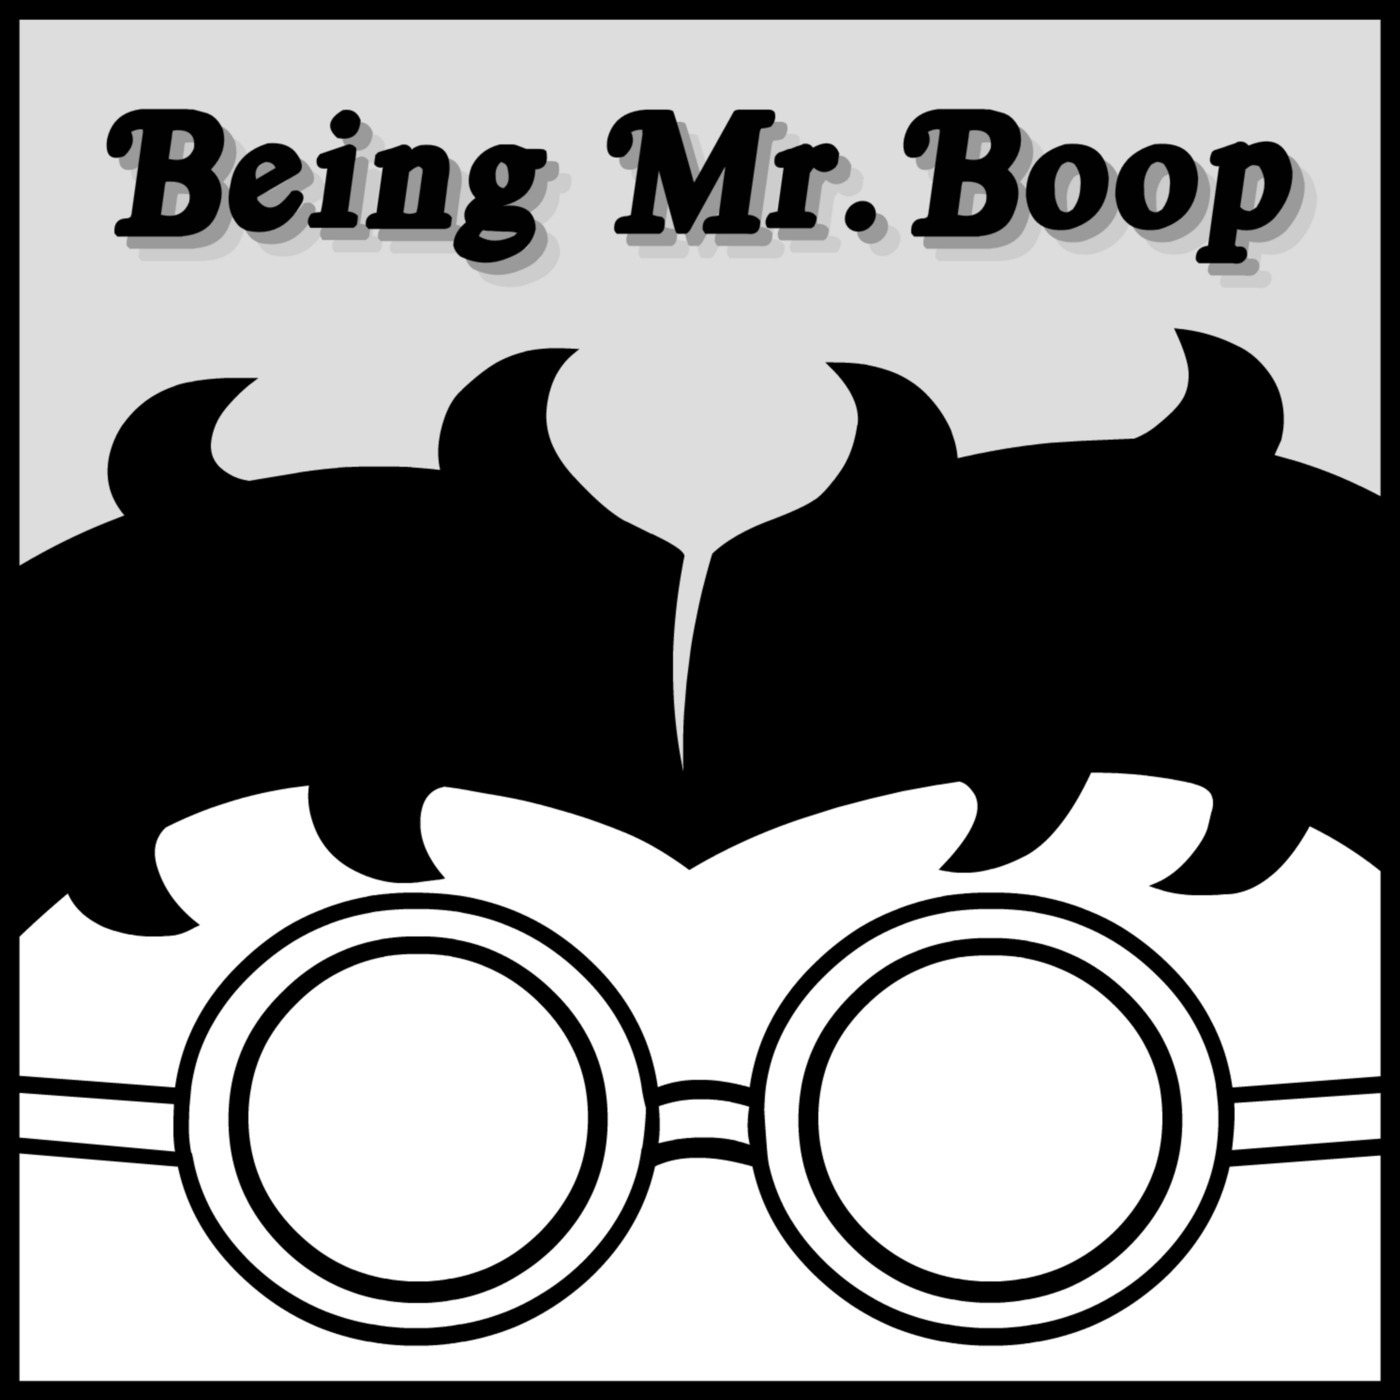 Being Mr. Boop: Episode 55 - Sunday, April 12th, 2020